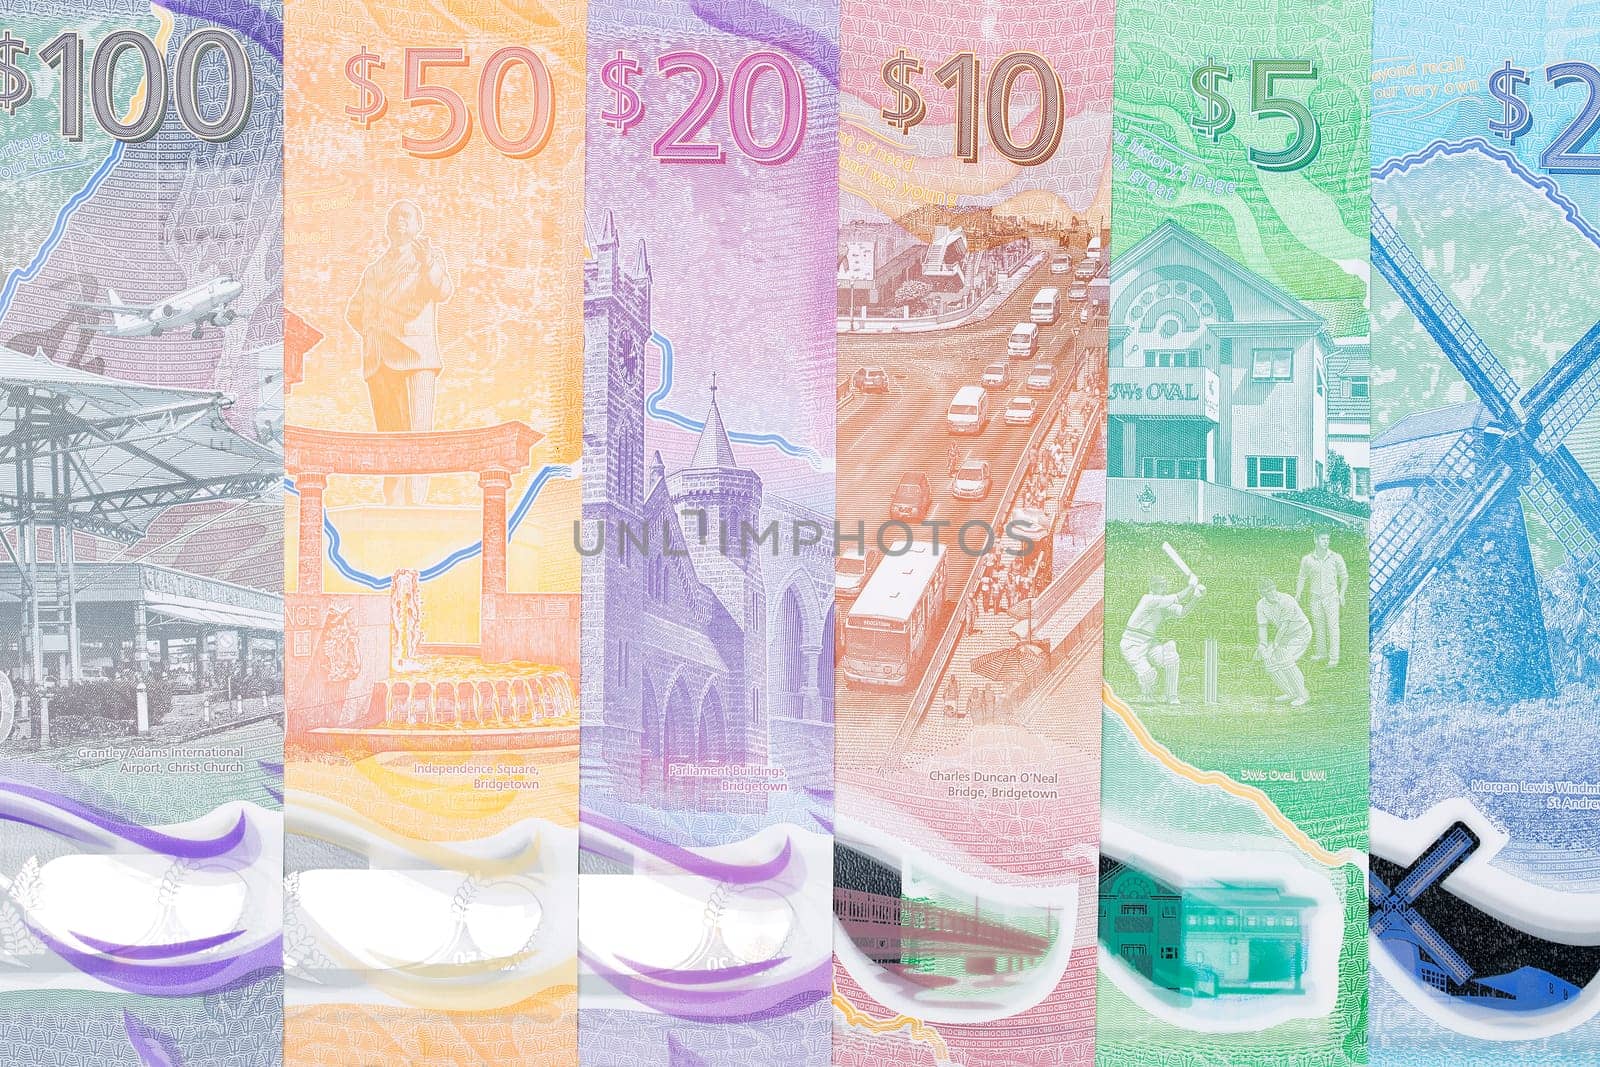 Barbados money - new series of banknotes by johan10